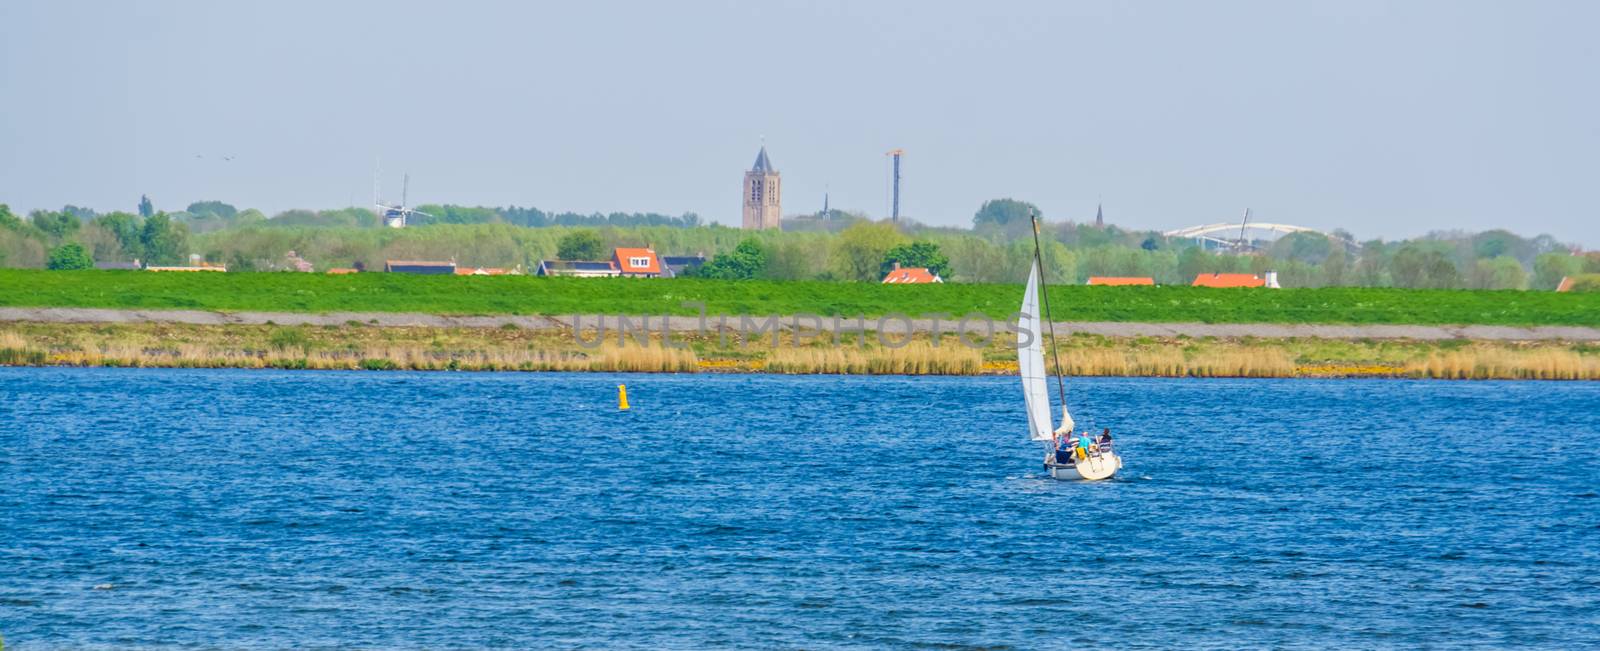 ship sailing on the oosterschelde with the city scenery in the background, Tholen, Zeeland, The netherlands by charlottebleijenberg